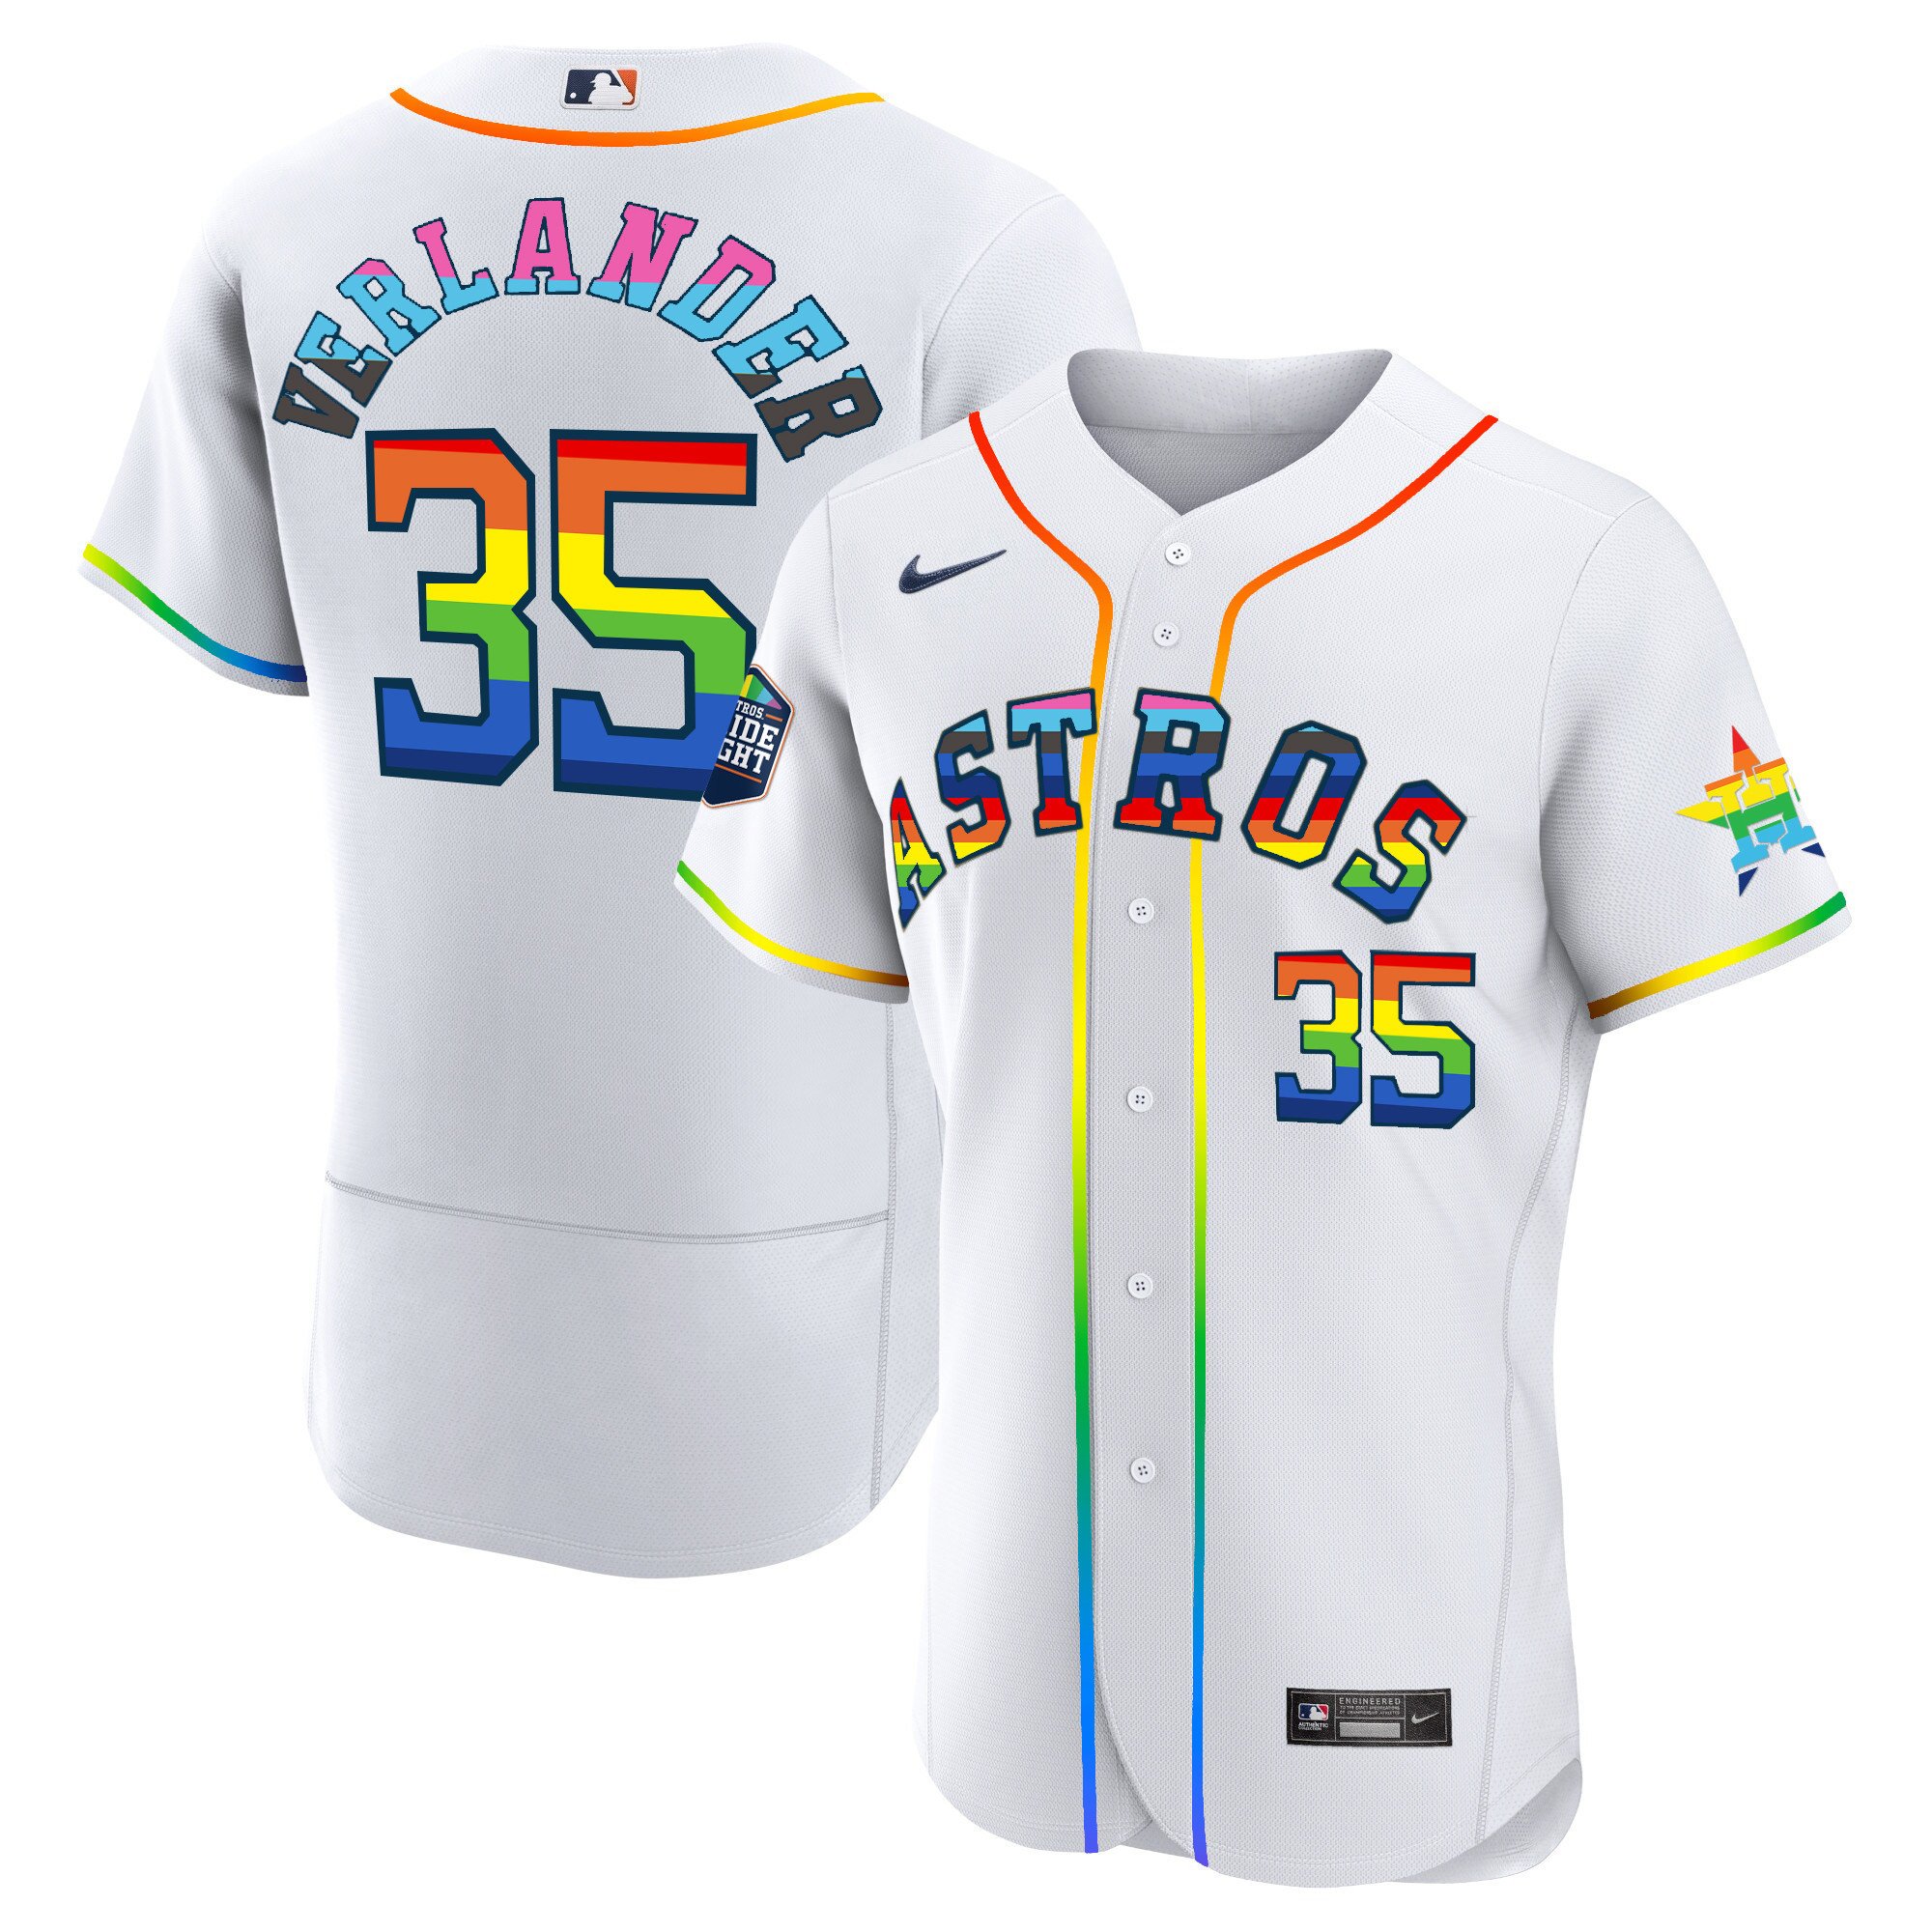 astros game jersey